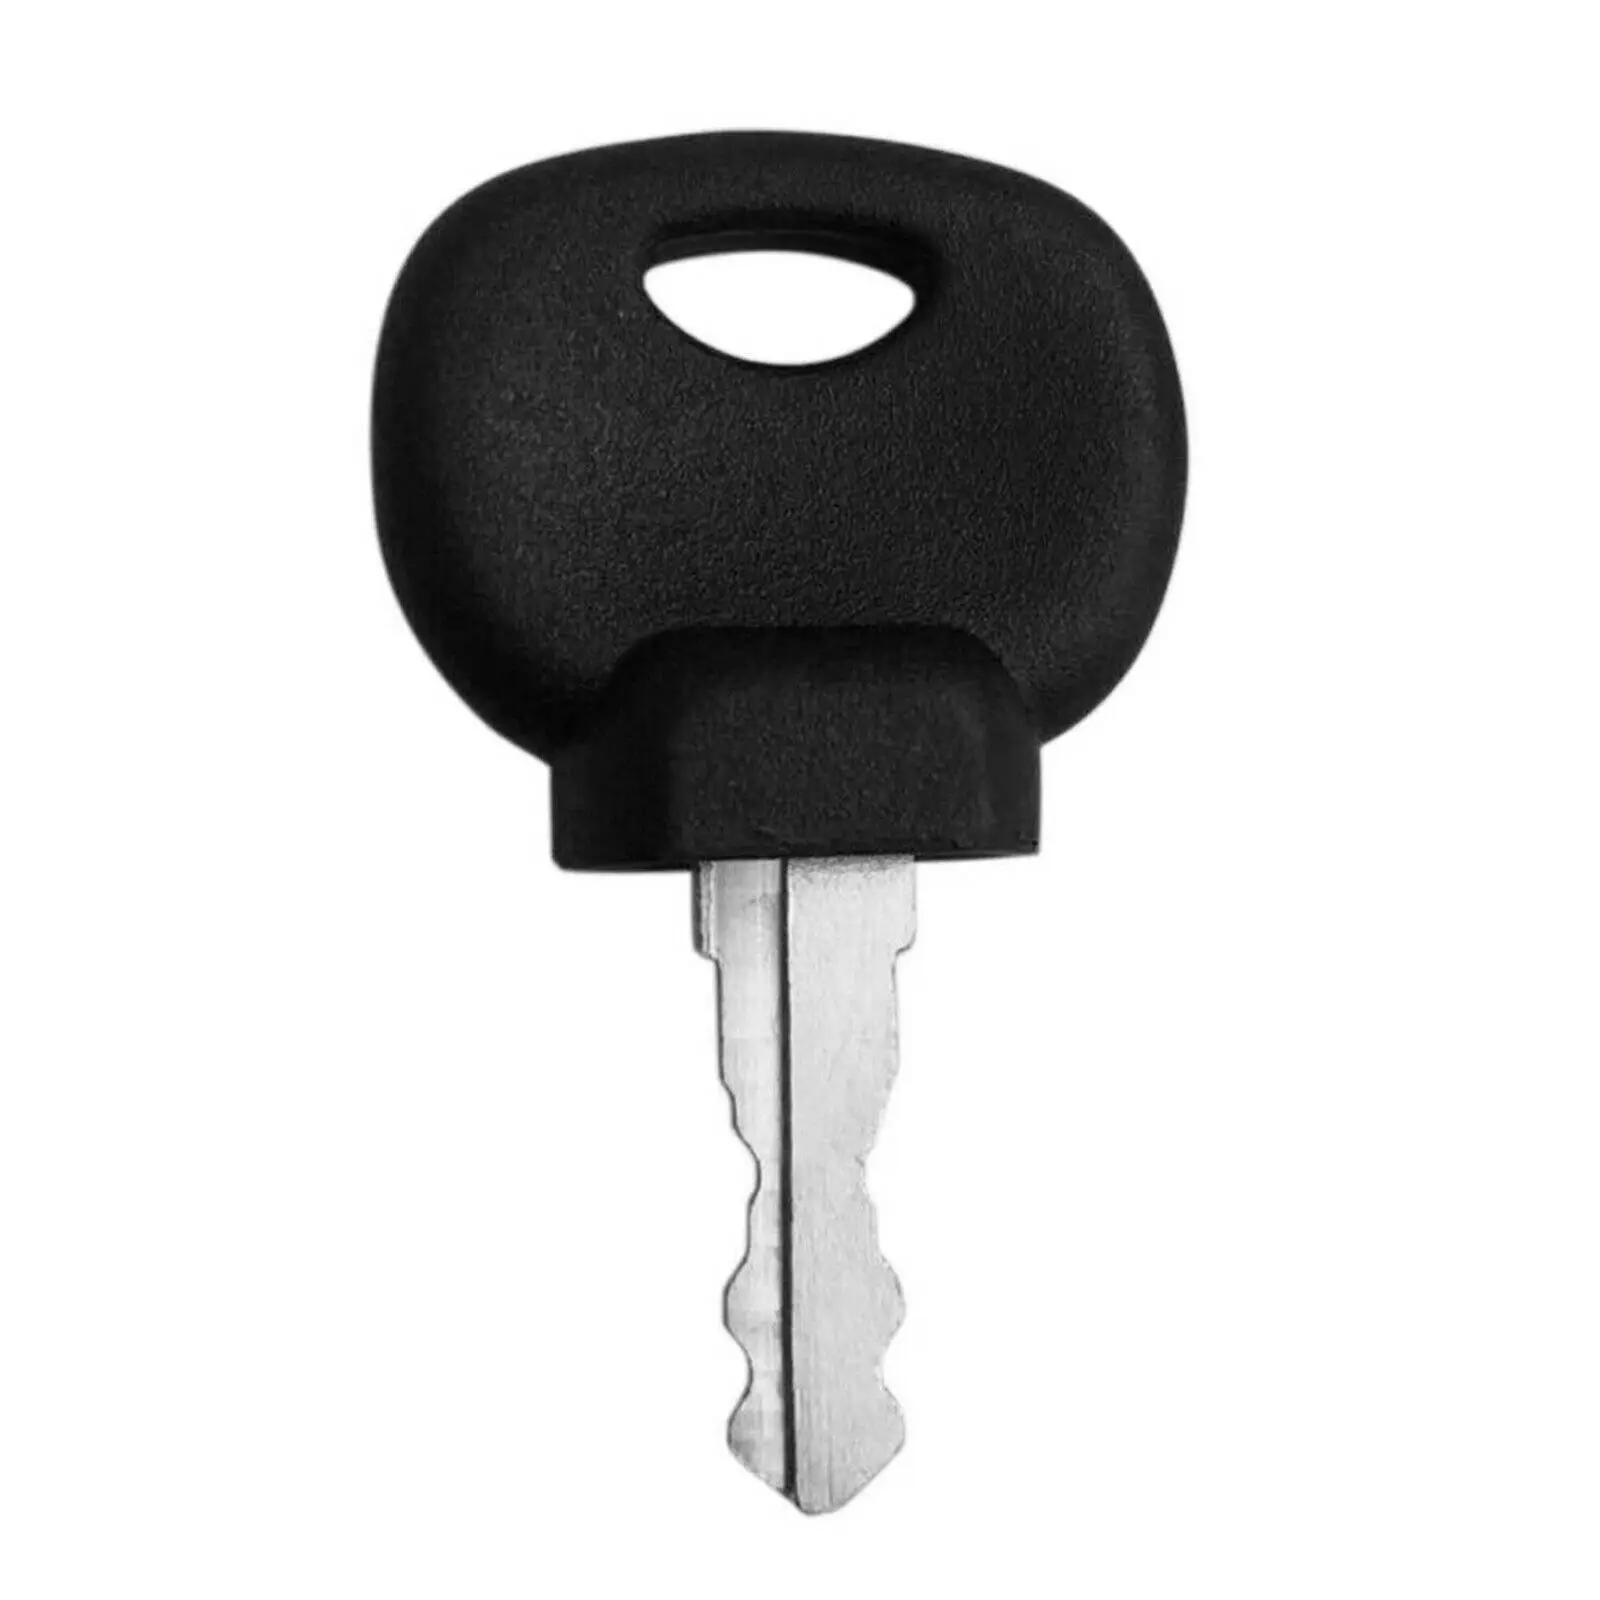 

1pc Auto Ignition Key Plant Application Spare 14607 For Jcb Bomag Manitou Tractor Construction Machinery Key Kit